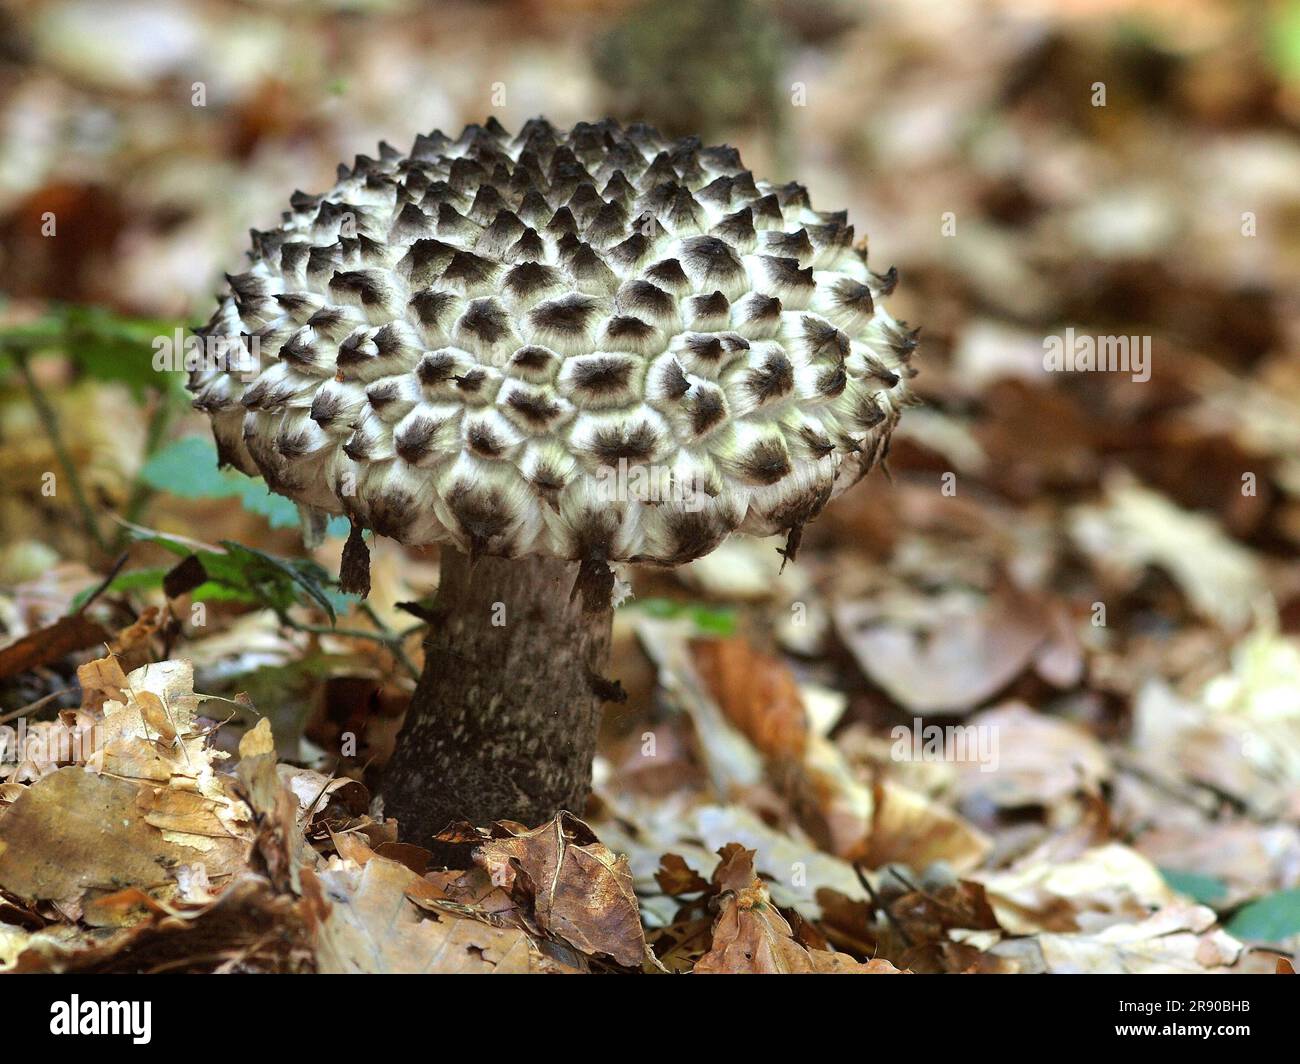 commonly known as old (Strobilomyces strobilaceus) man of the woods, is a species of fungus in the family Boletaceae. It is native to Europe and Stock Photo